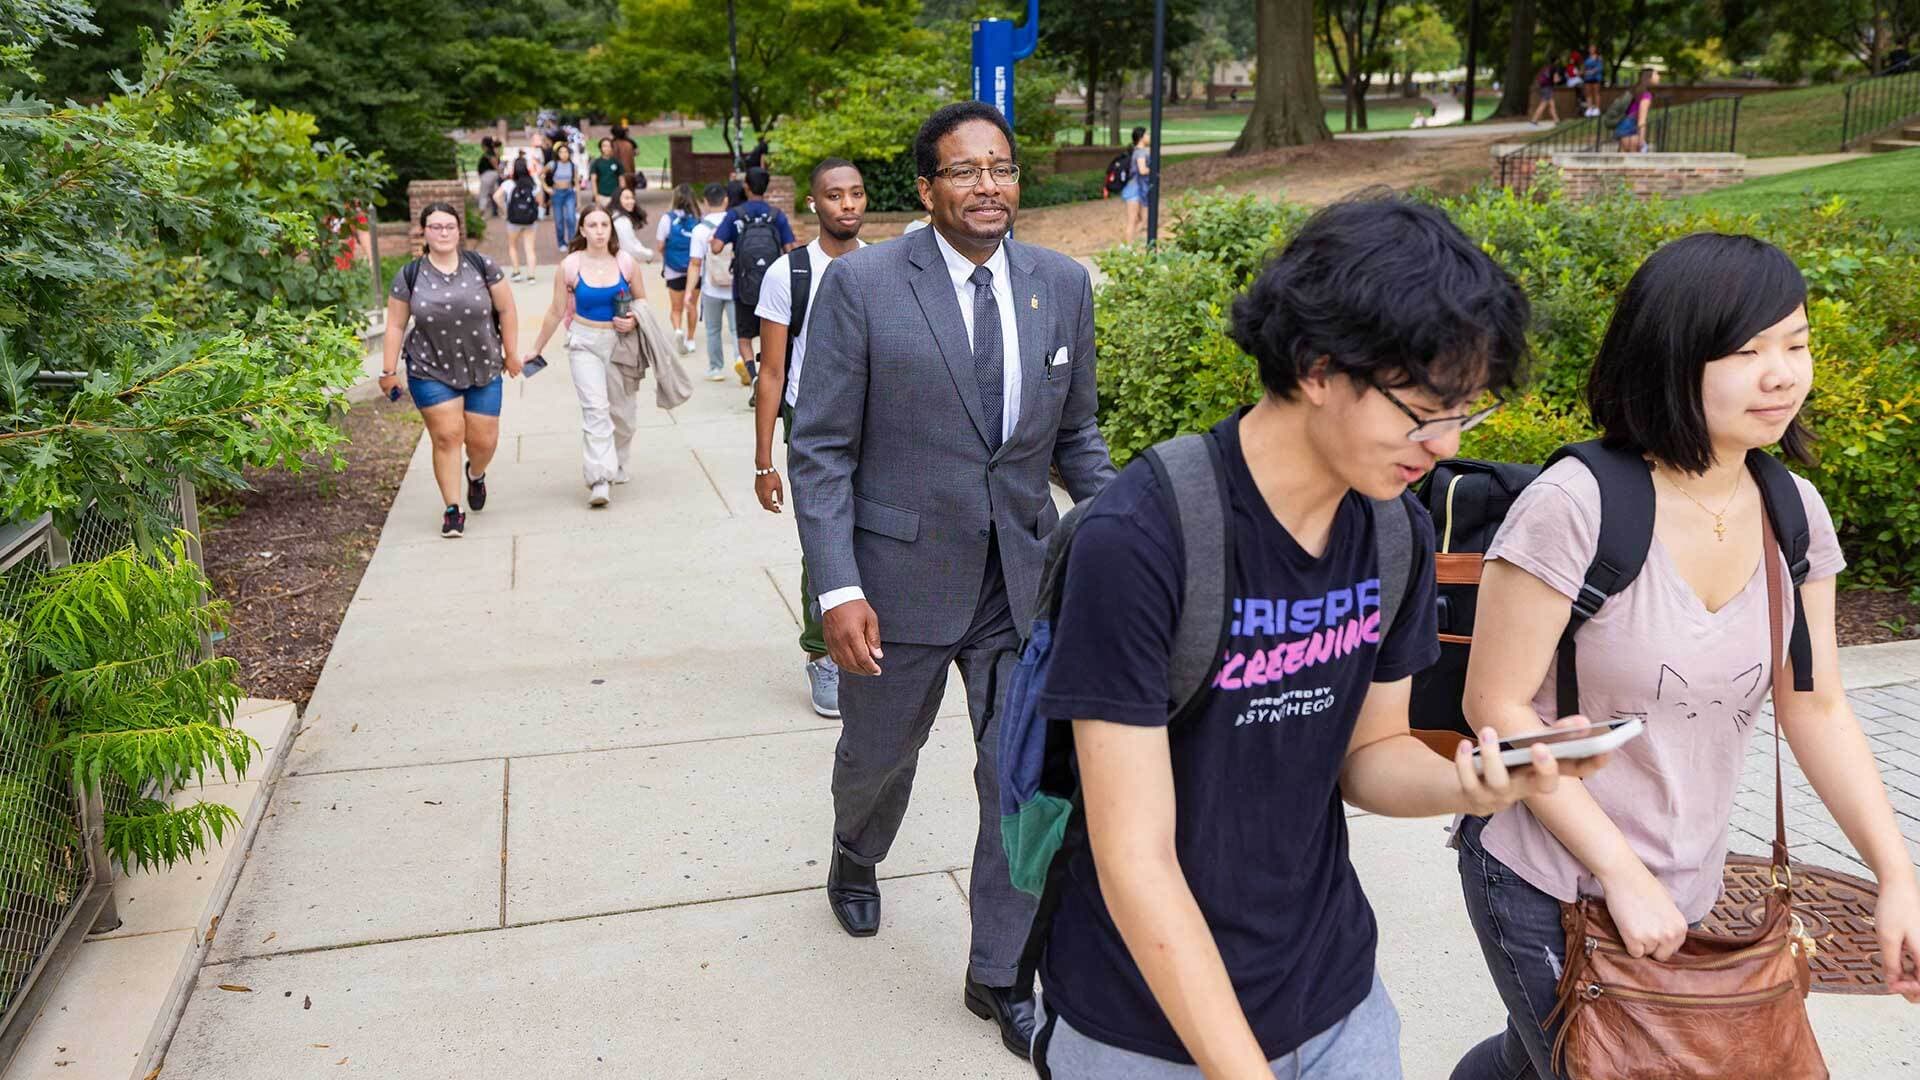 Pines walks with students on campus